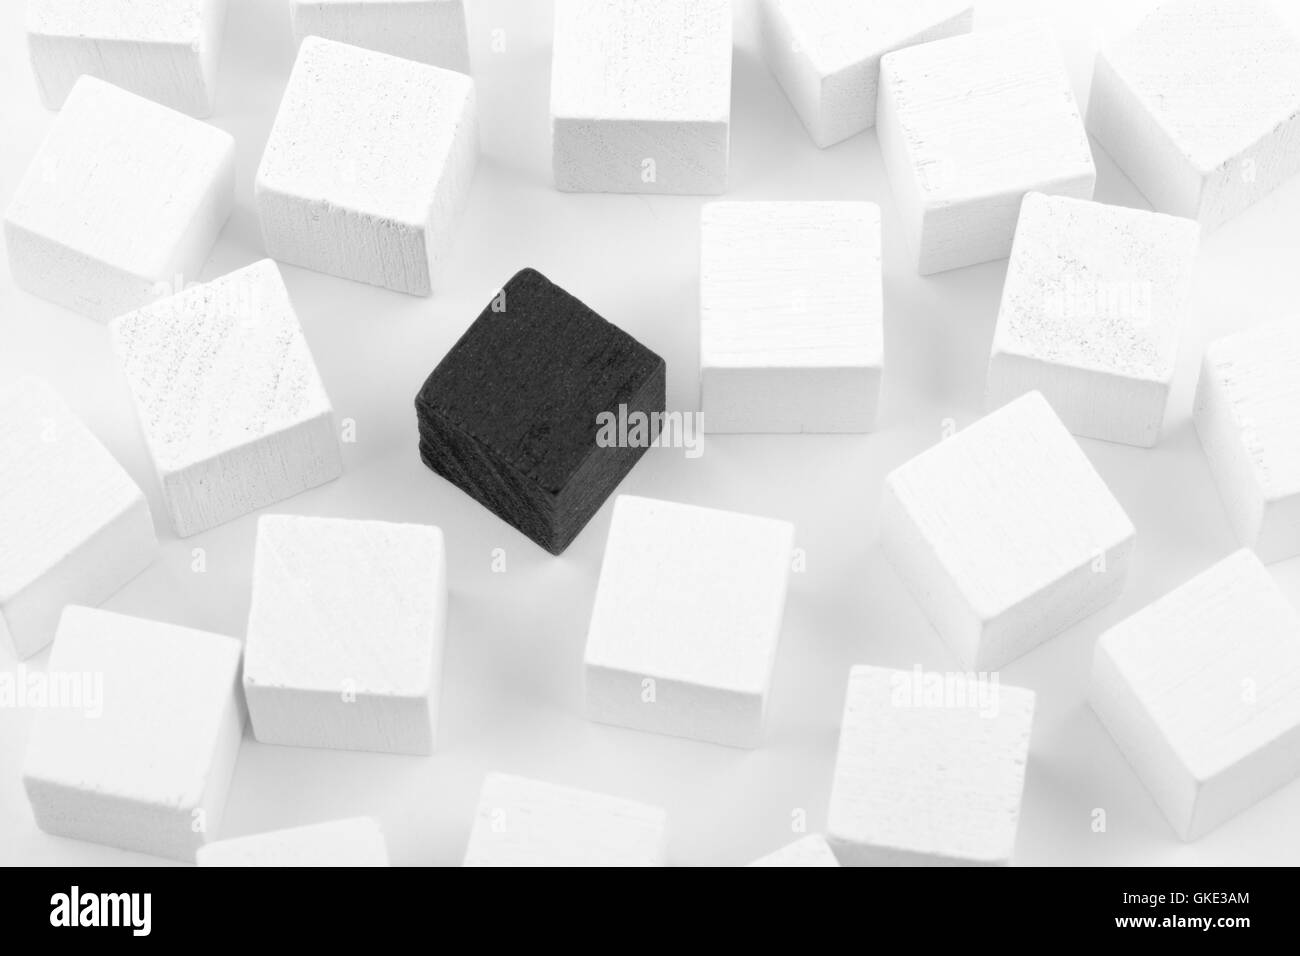 Black cube surrounded by white cubes Stock Photo